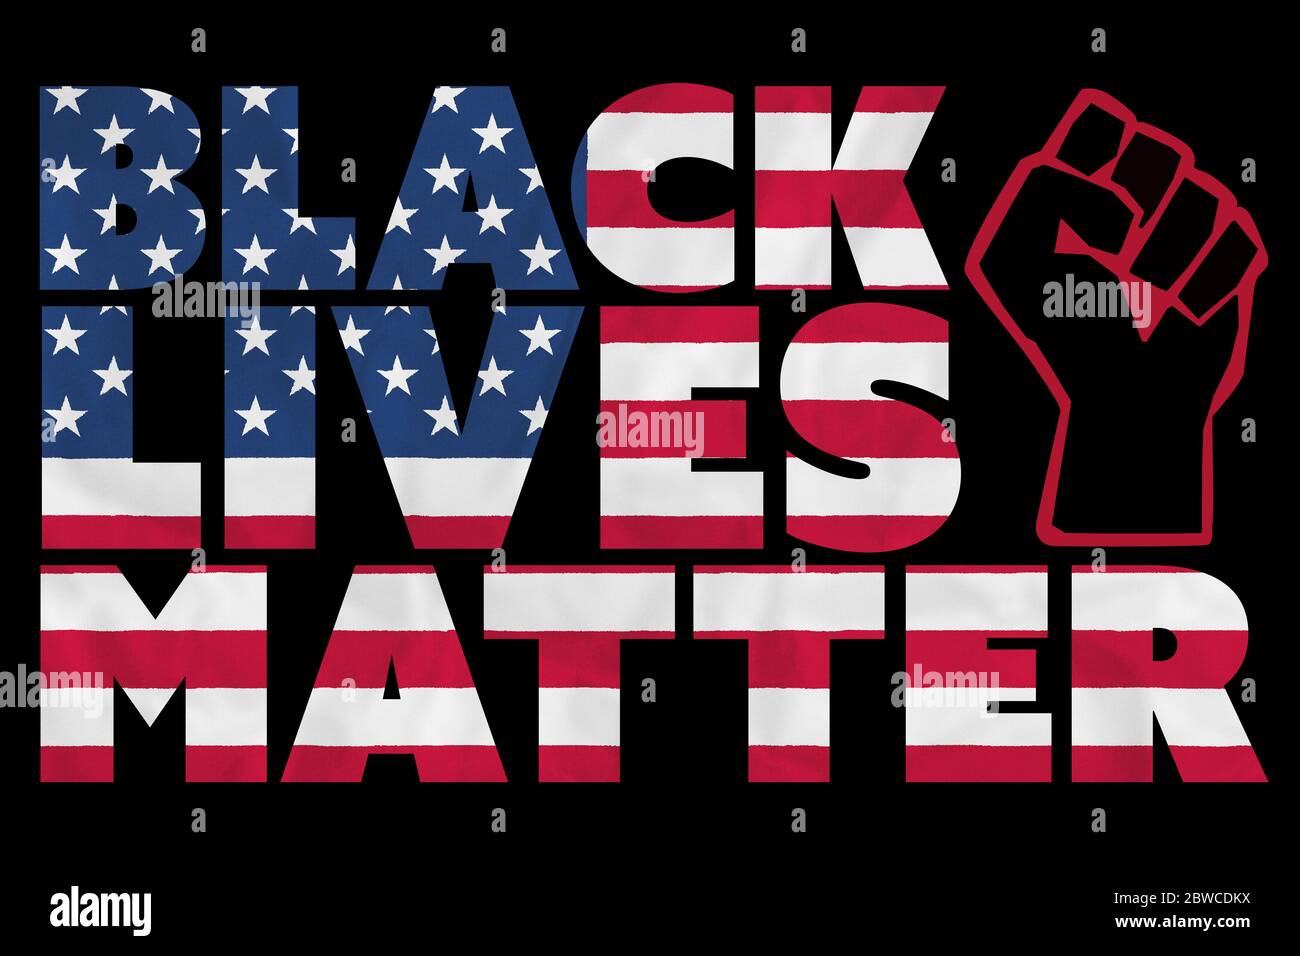 A Black Lives Matter (#BLM) graphic illustration for use as poster to raise awareness about racial inequality and prejudice against African American's Stock Photo